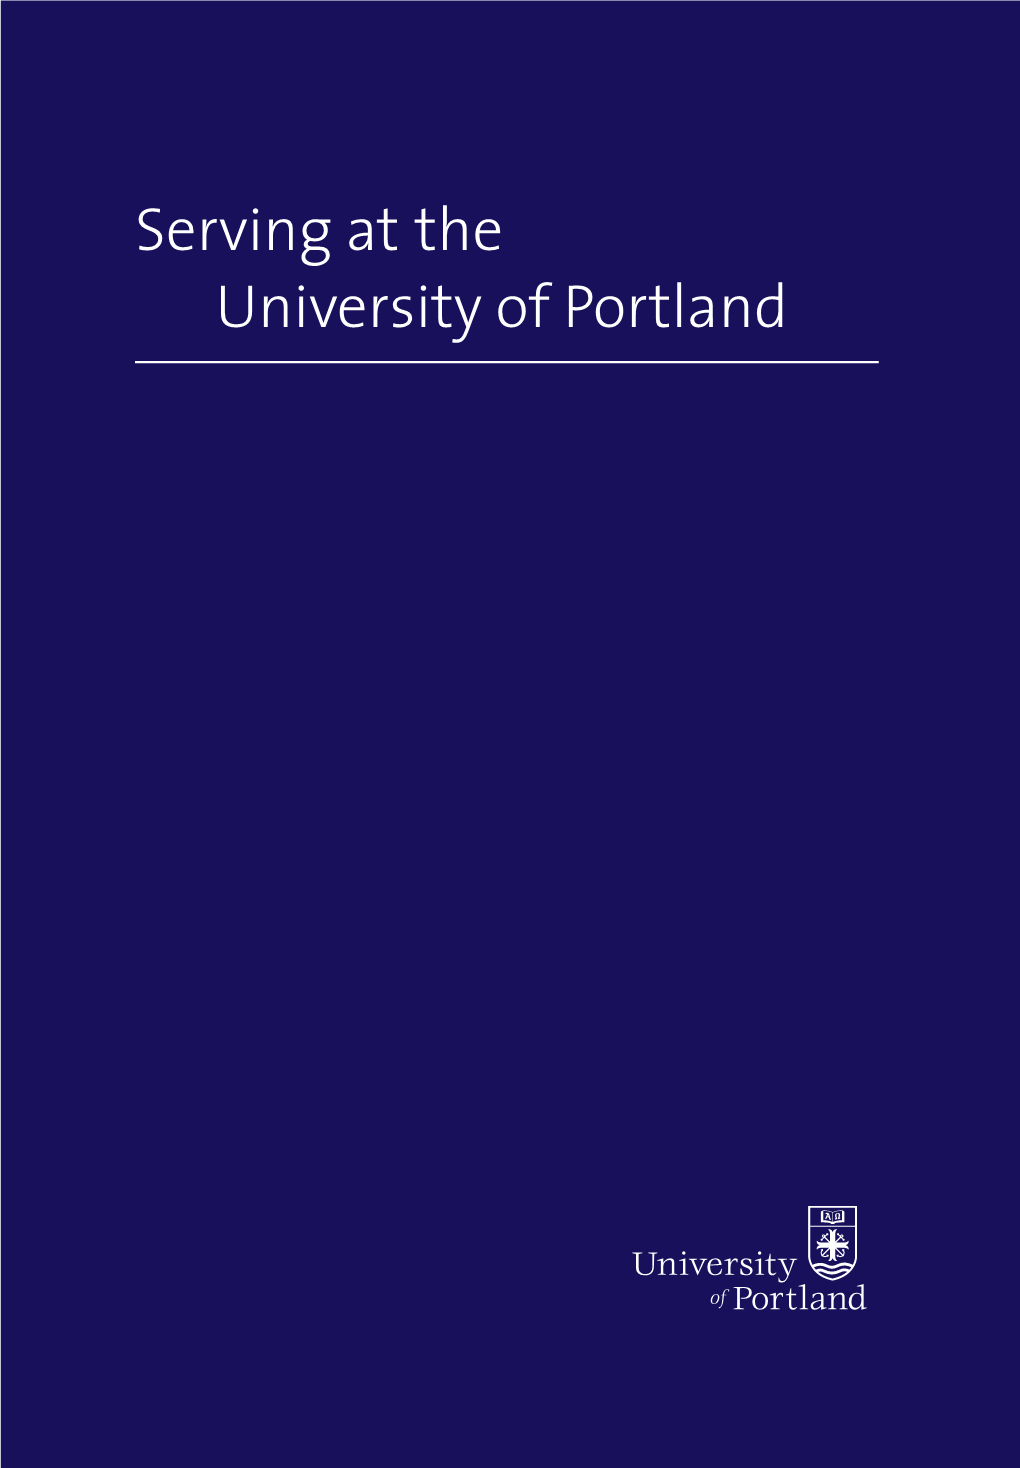 Serving at the University of Portland